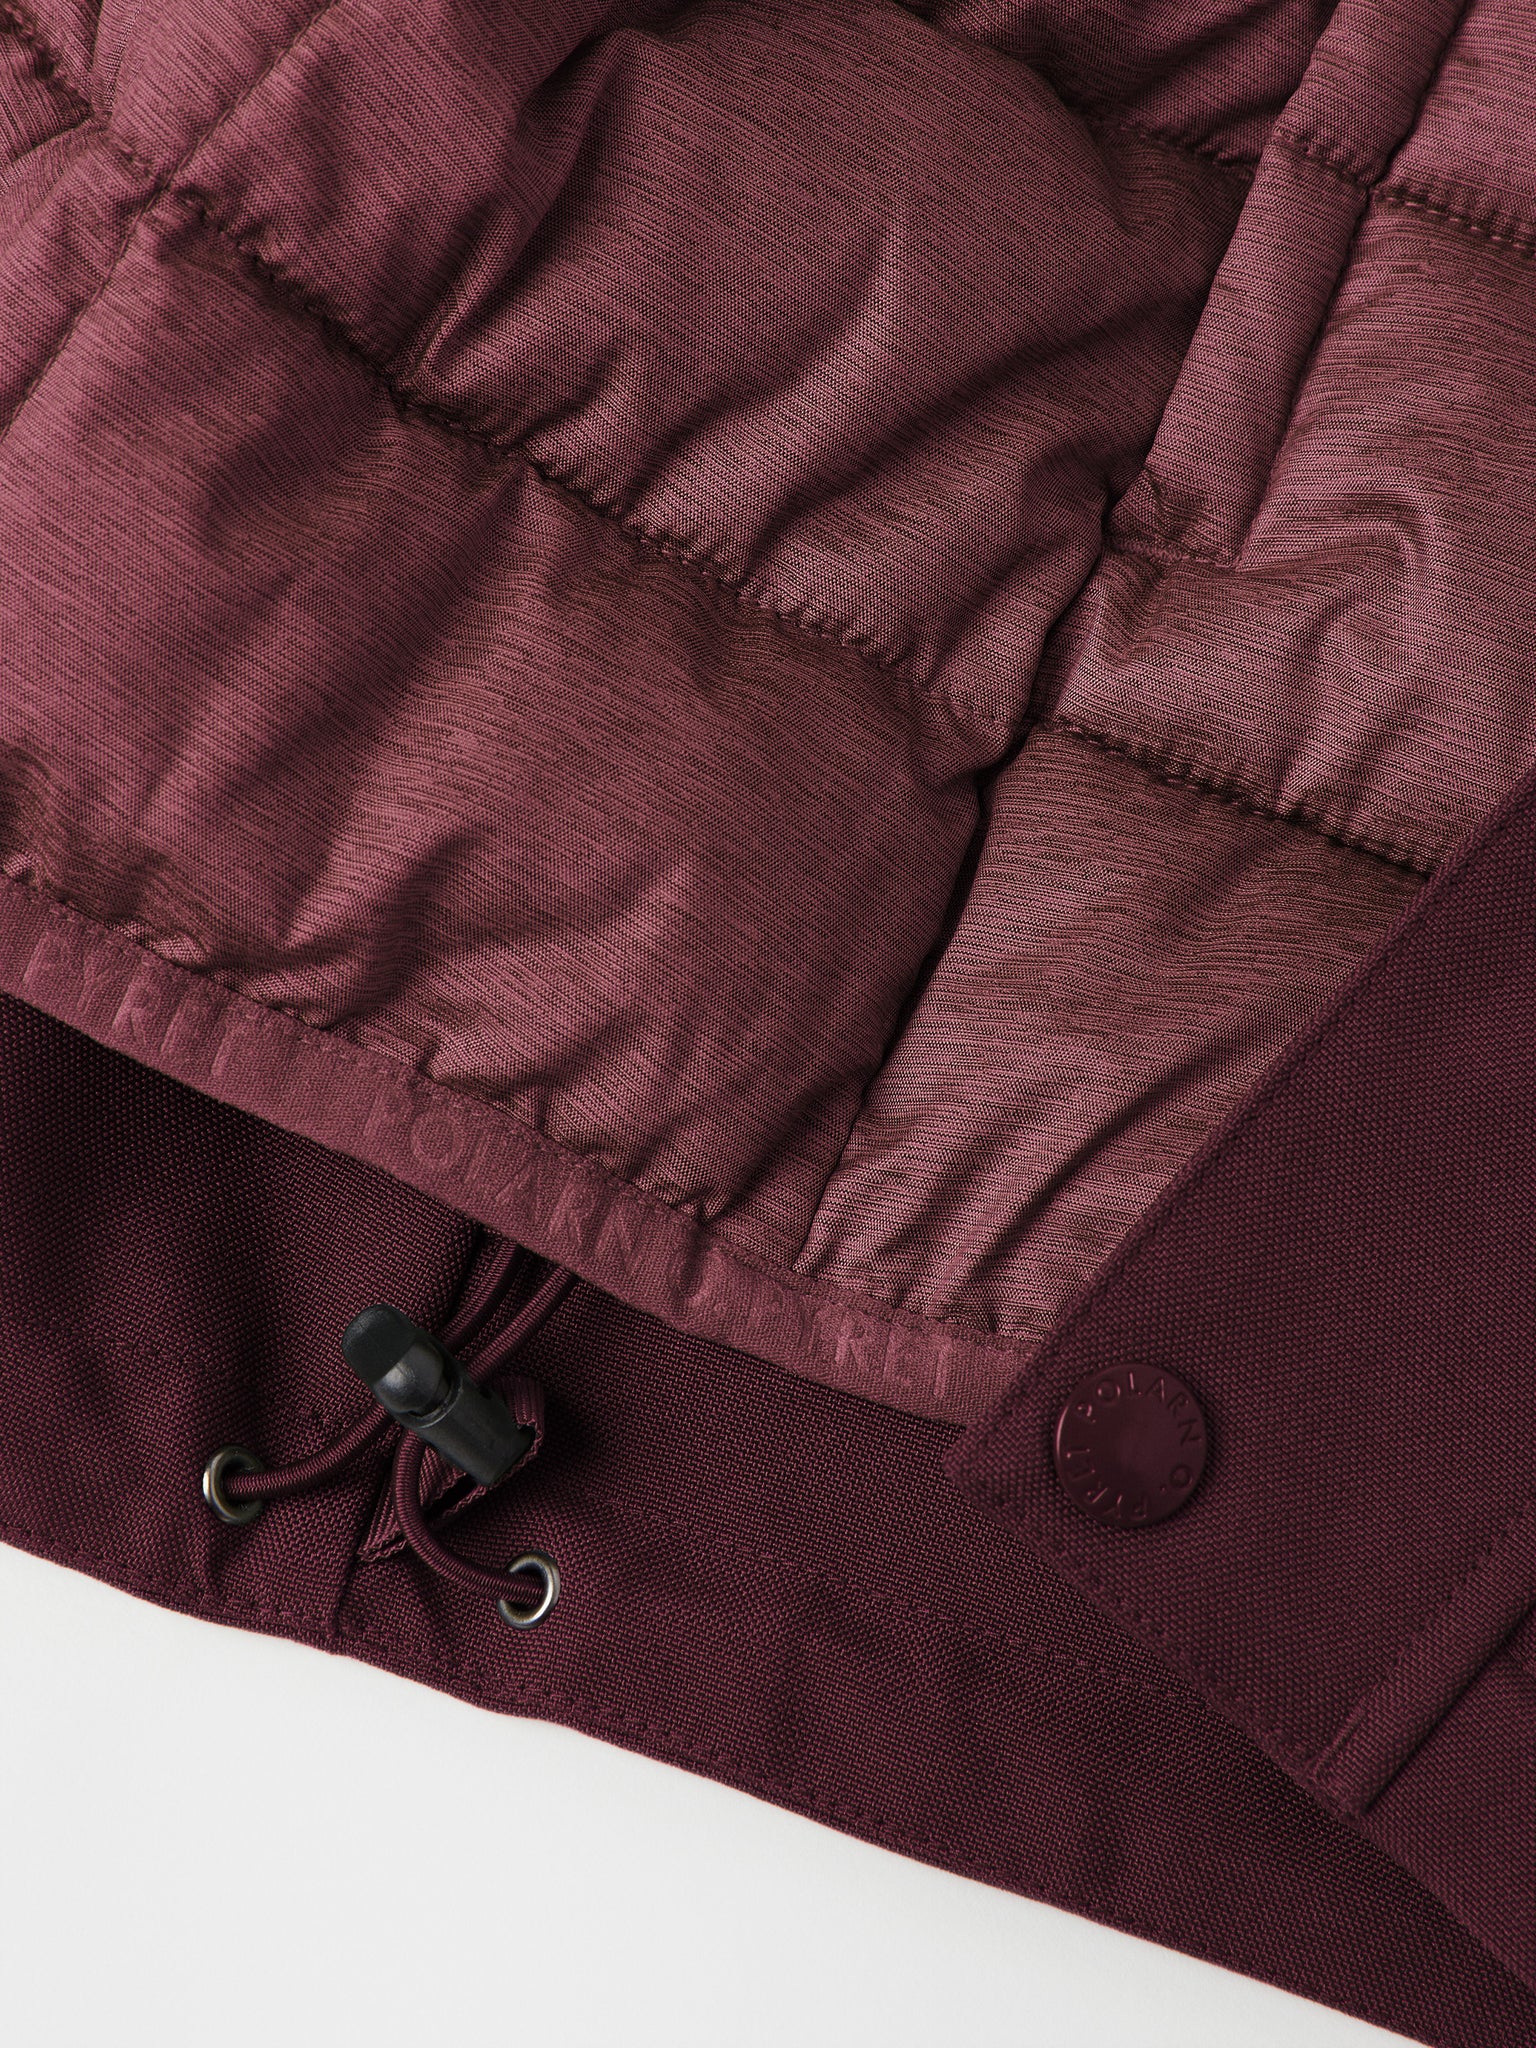 Kids Burgundy 3 in 1 Coat from the Polarn O. Pyret outerwear collection. Made using ethically sourced materials.